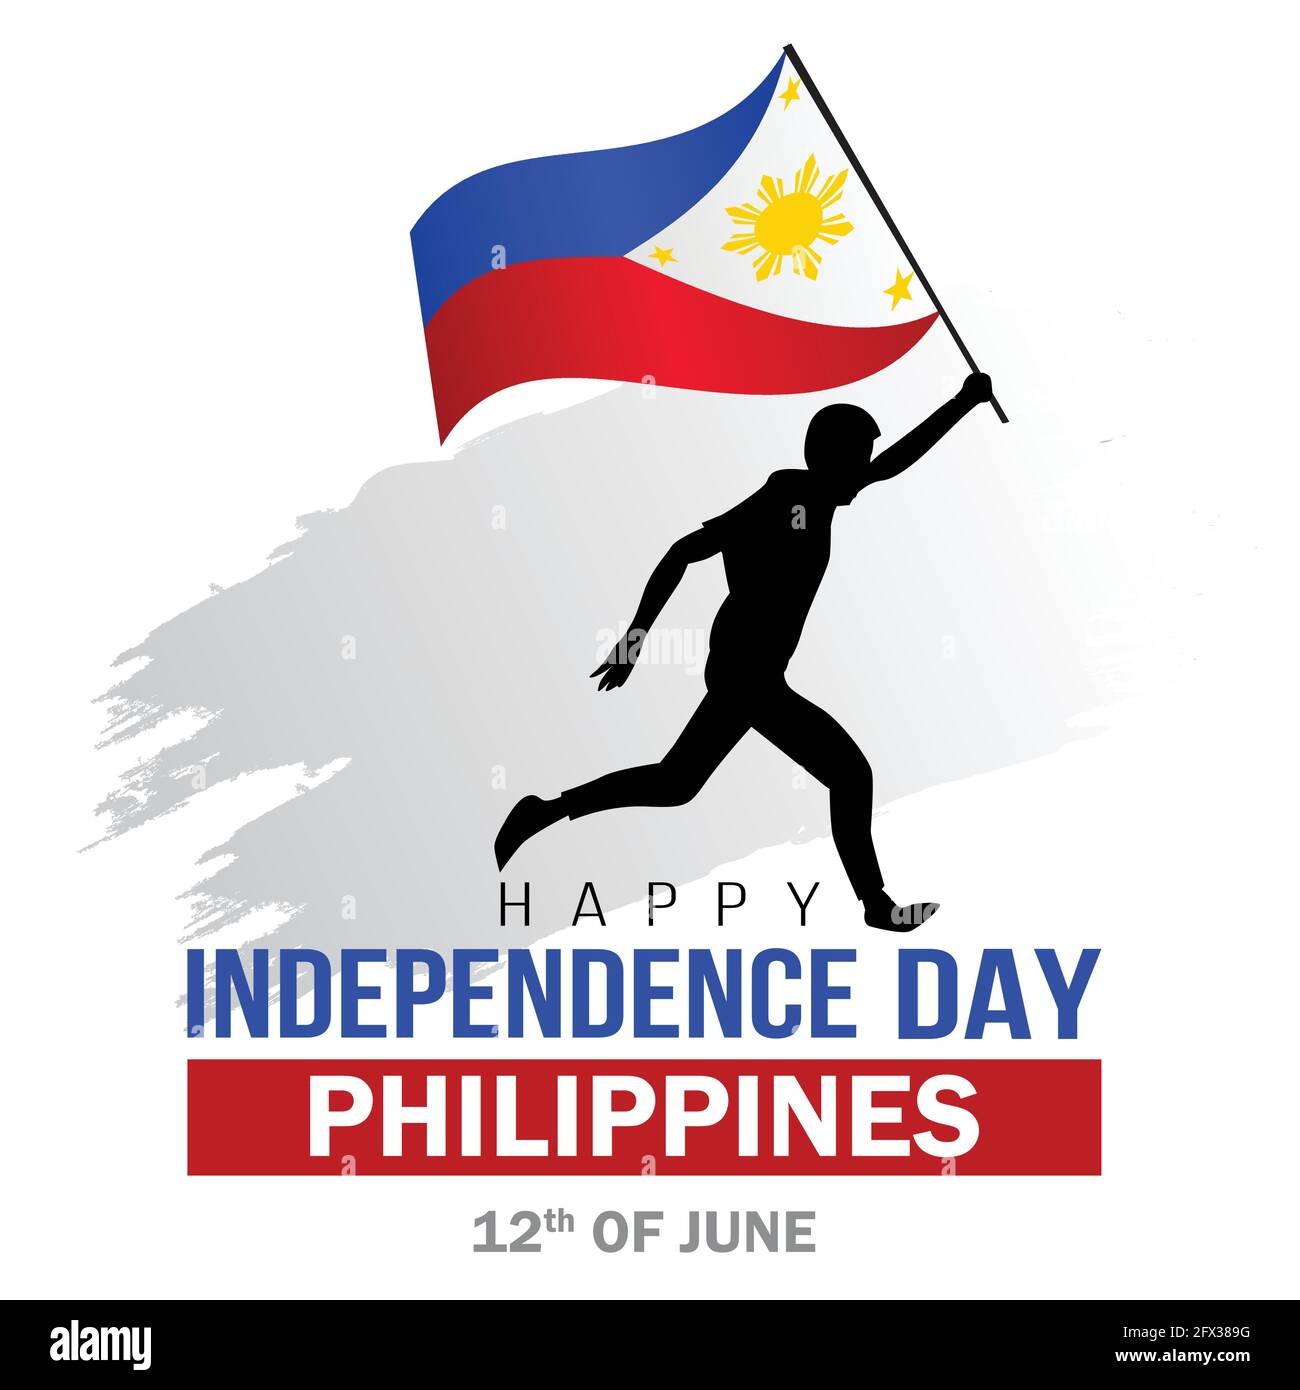 Happy Independence Day Philippine Vector Template Design Illustration Silhouette Man Running With Flag Stock Vector Image Art Alamy